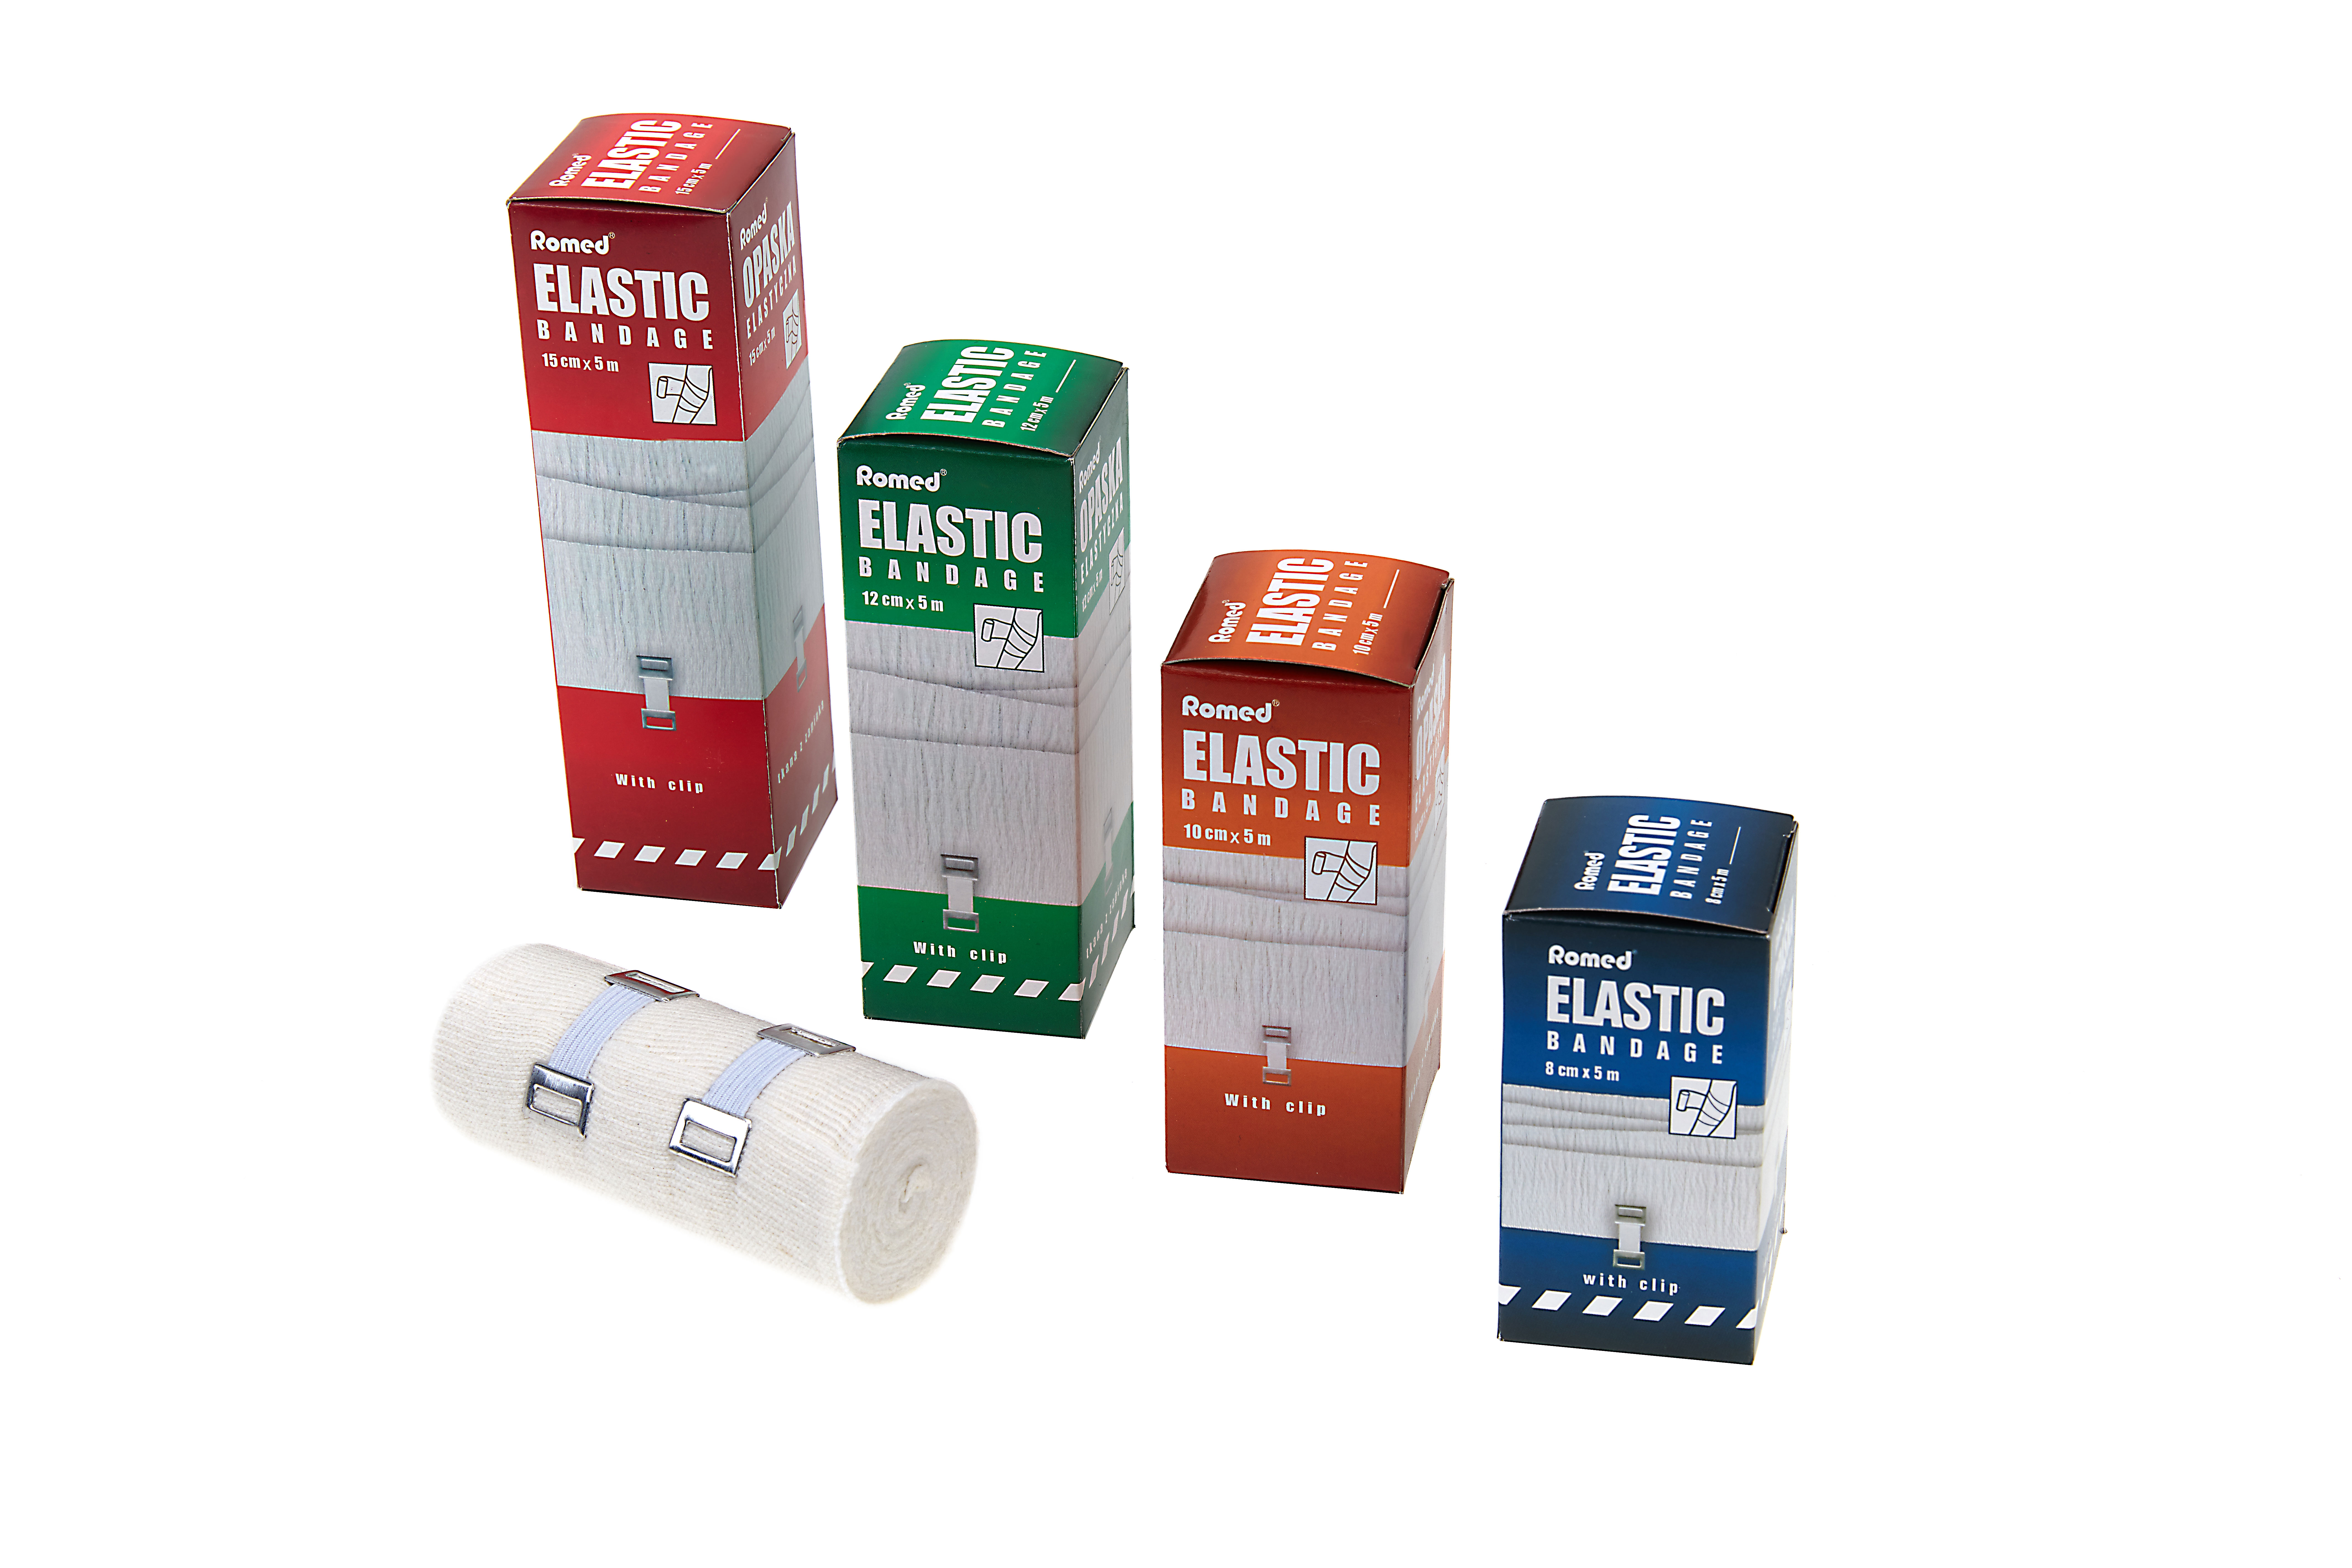 EB8X5 Romed elastic bandages, 8cm x 5m, per piece in cellophane and box, per 5 boxes in polybag, 50 x 5 pcs = 250 pcs in a carton.